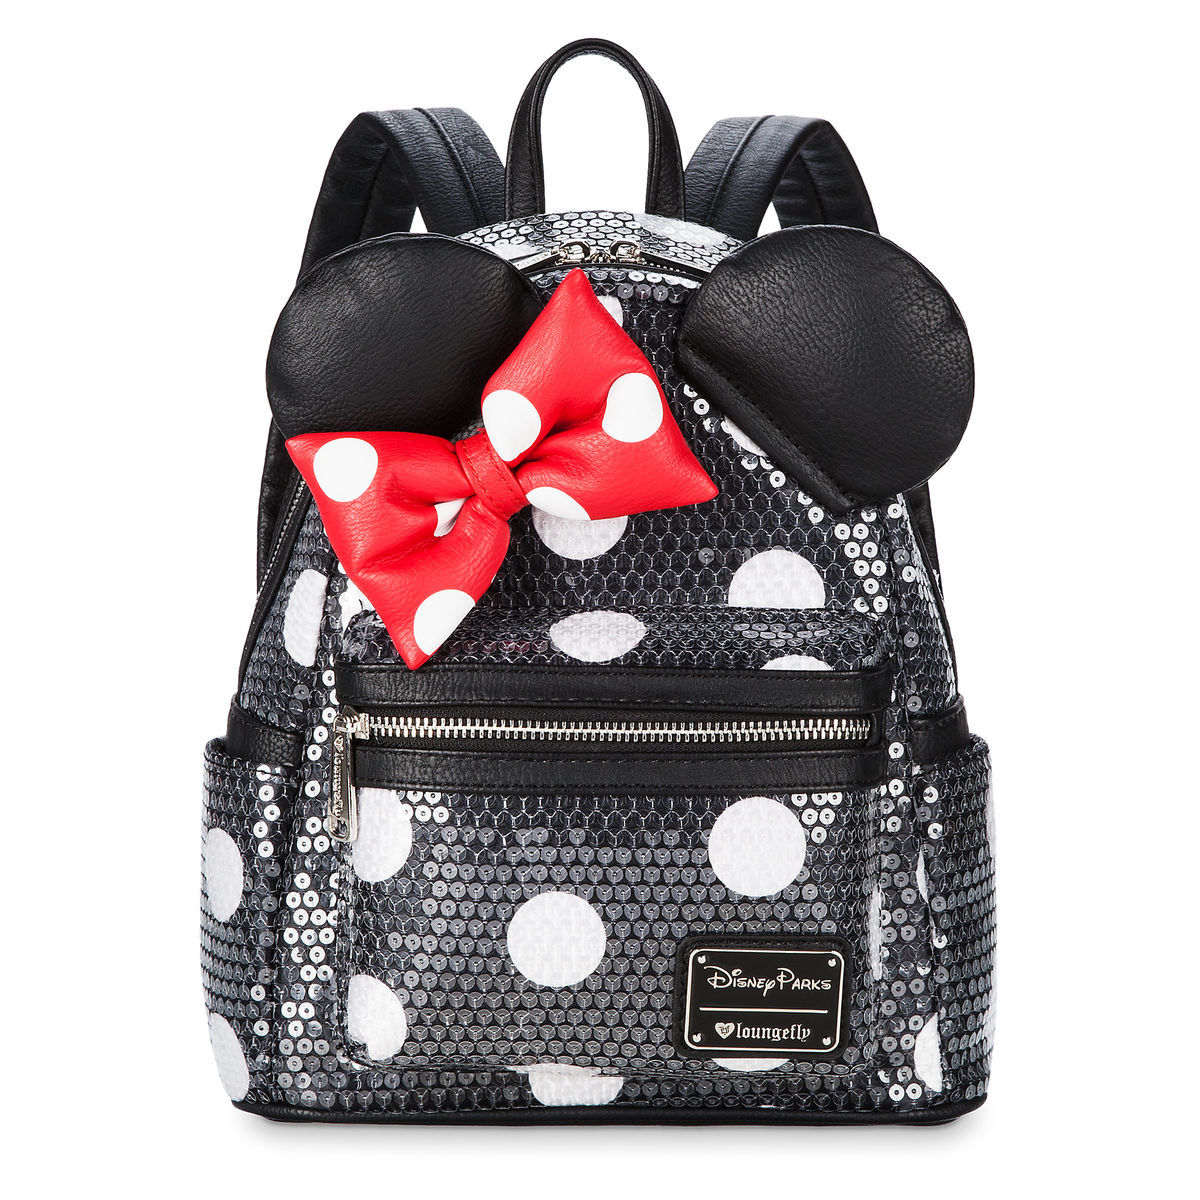 Disney Minnie Mouse Sequined Mini Backpack by Loungefly New with Tags